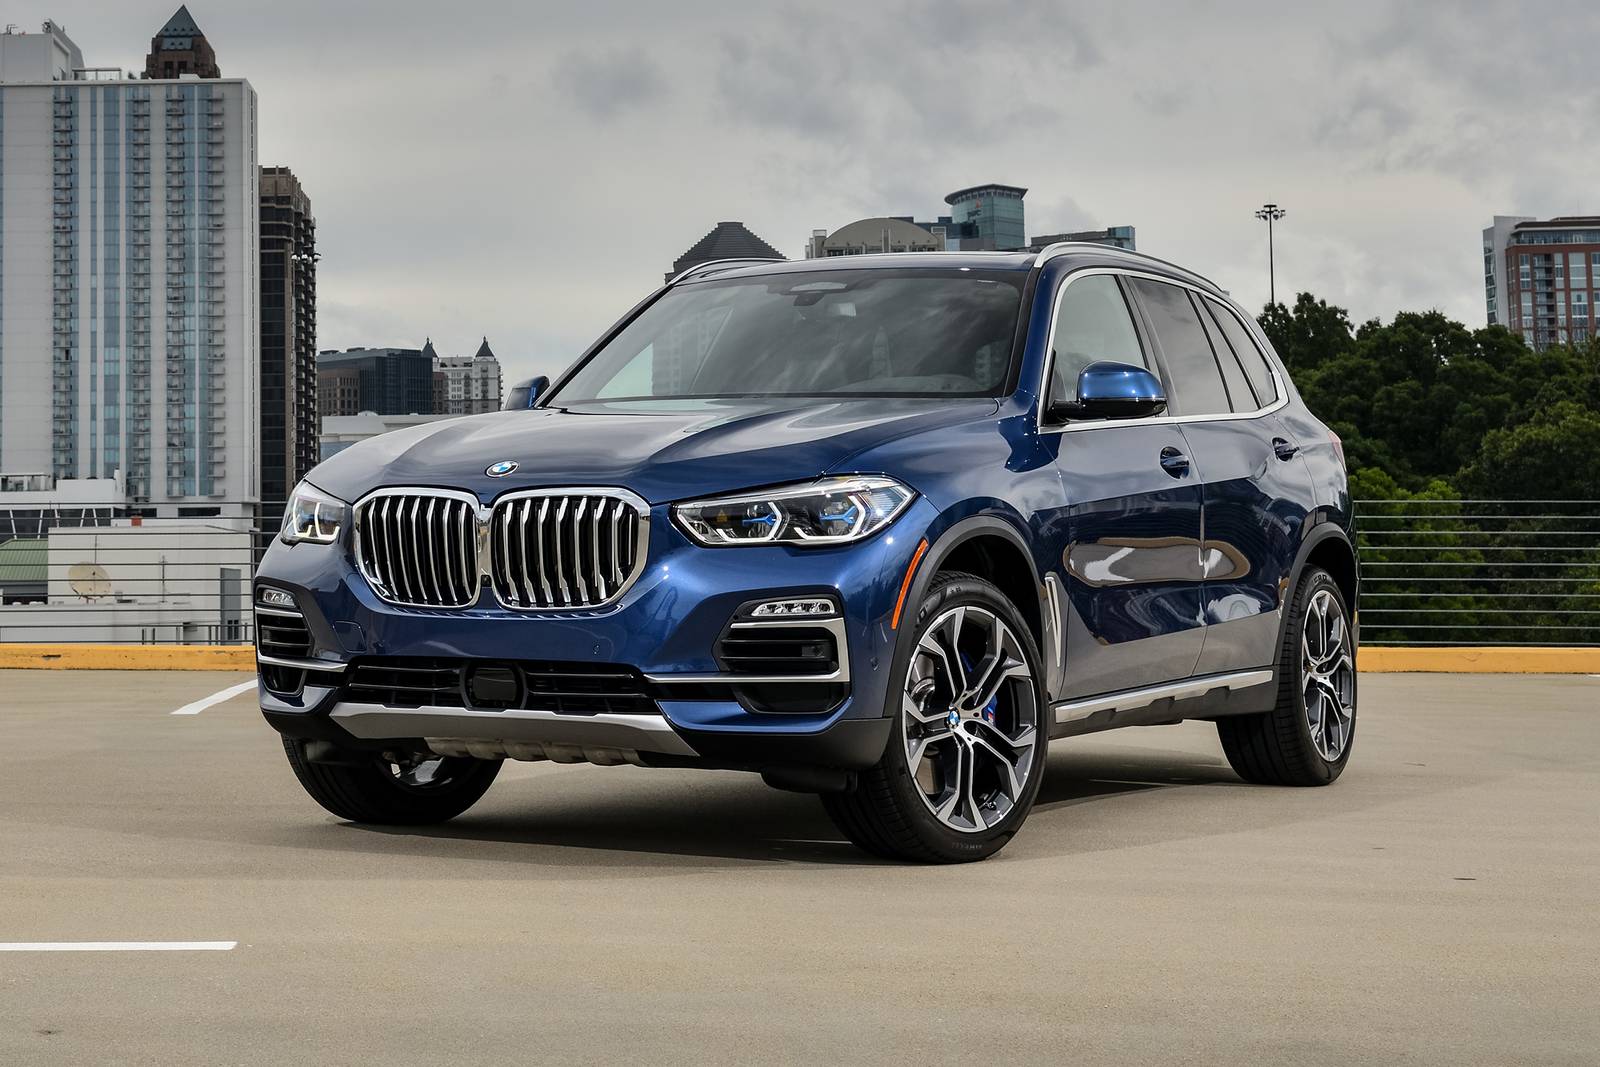 købe Flagermus sollys 2019 BMW X5 Review & Ratings | Edmunds